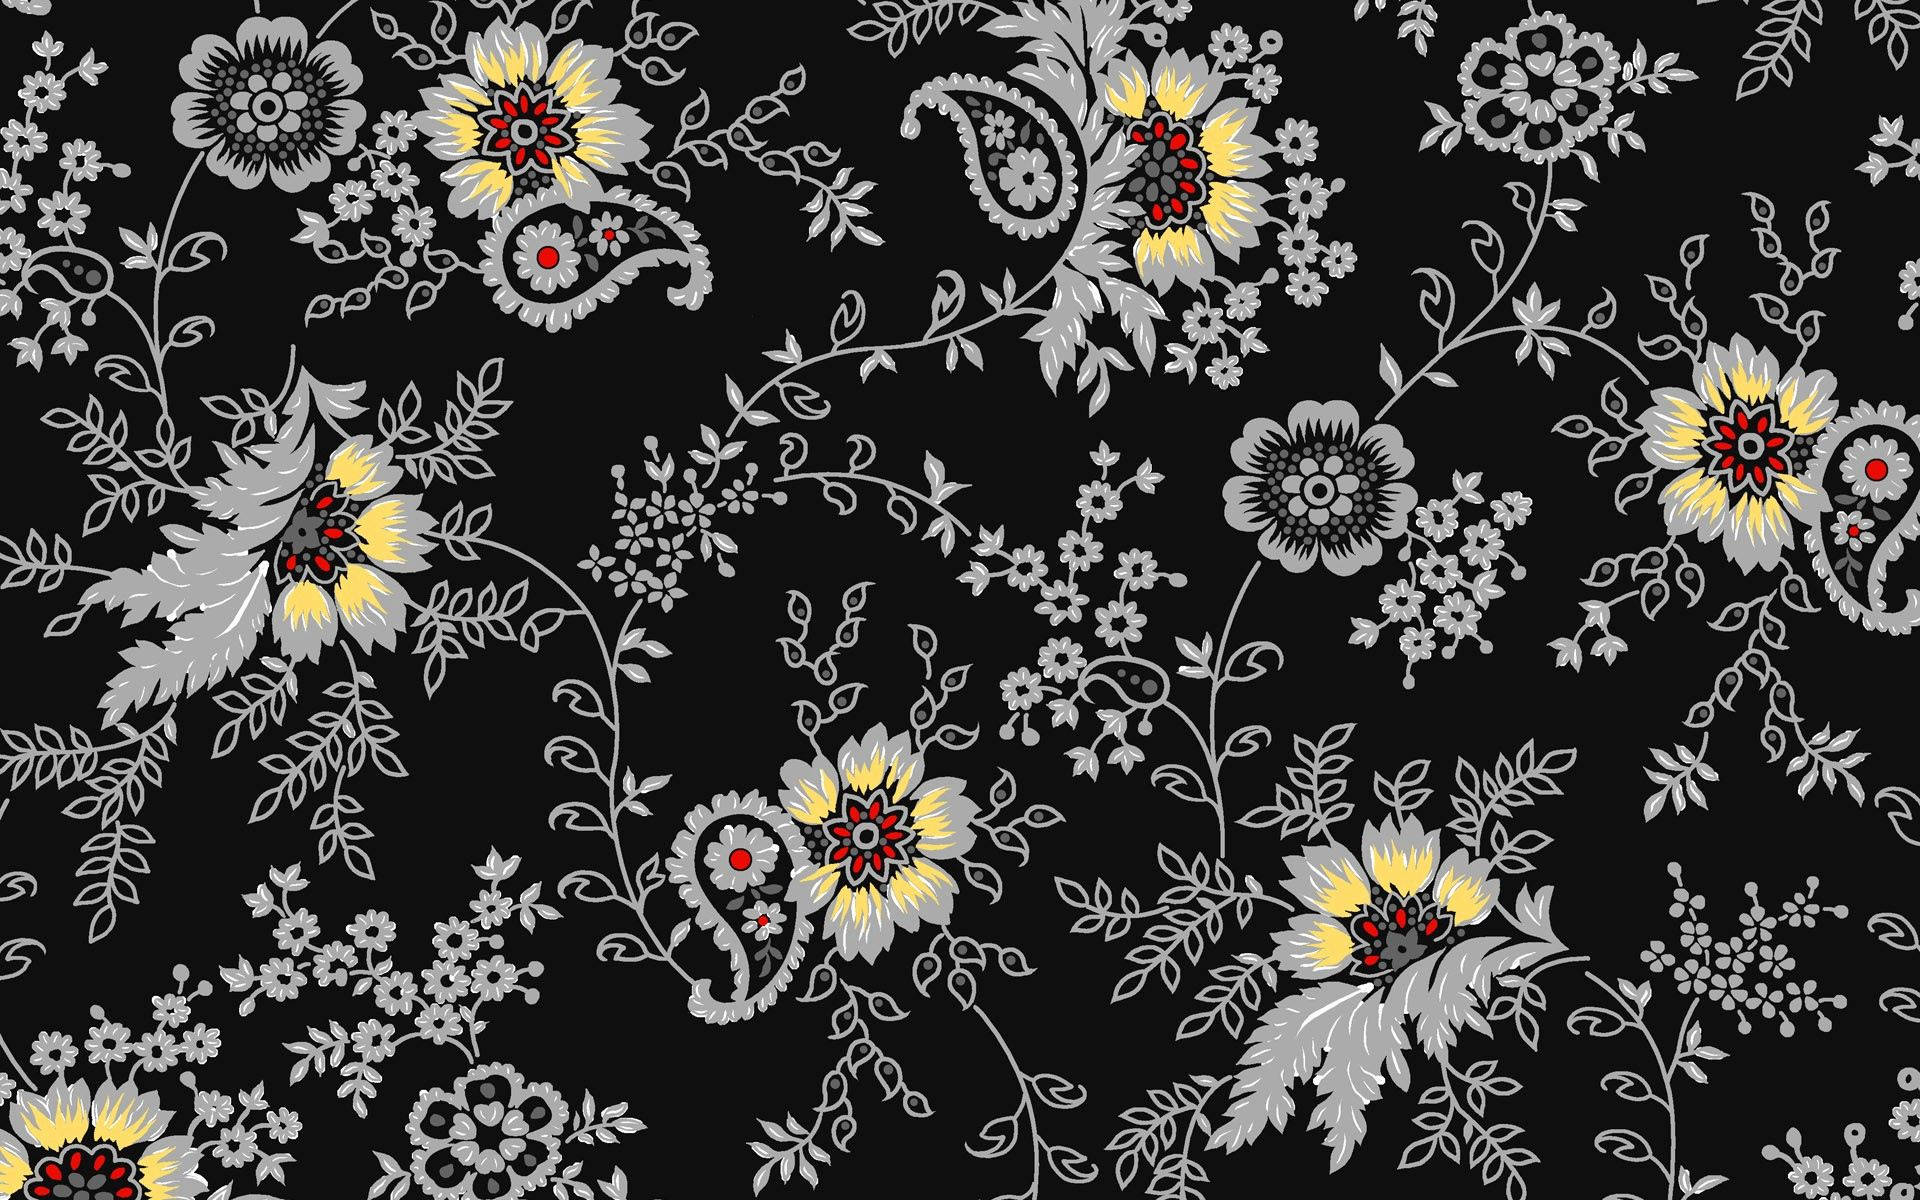 Grey flower pattern with red and yellow on black background.